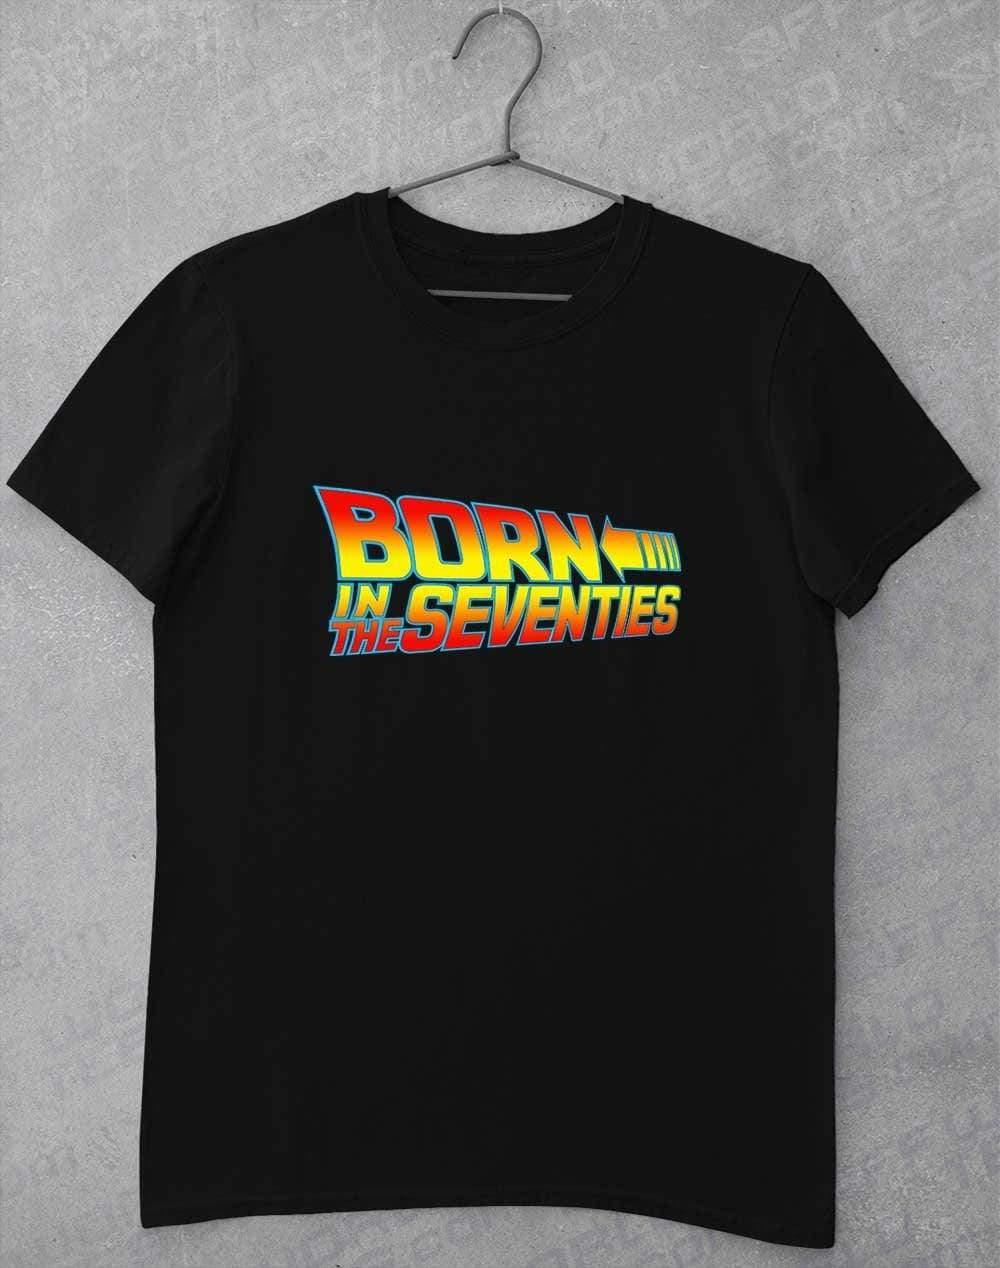 Born in the... (CHOOSE YOUR DECADE!) T-shirt THE SEVENTIES - Black / S  - Off World Tees